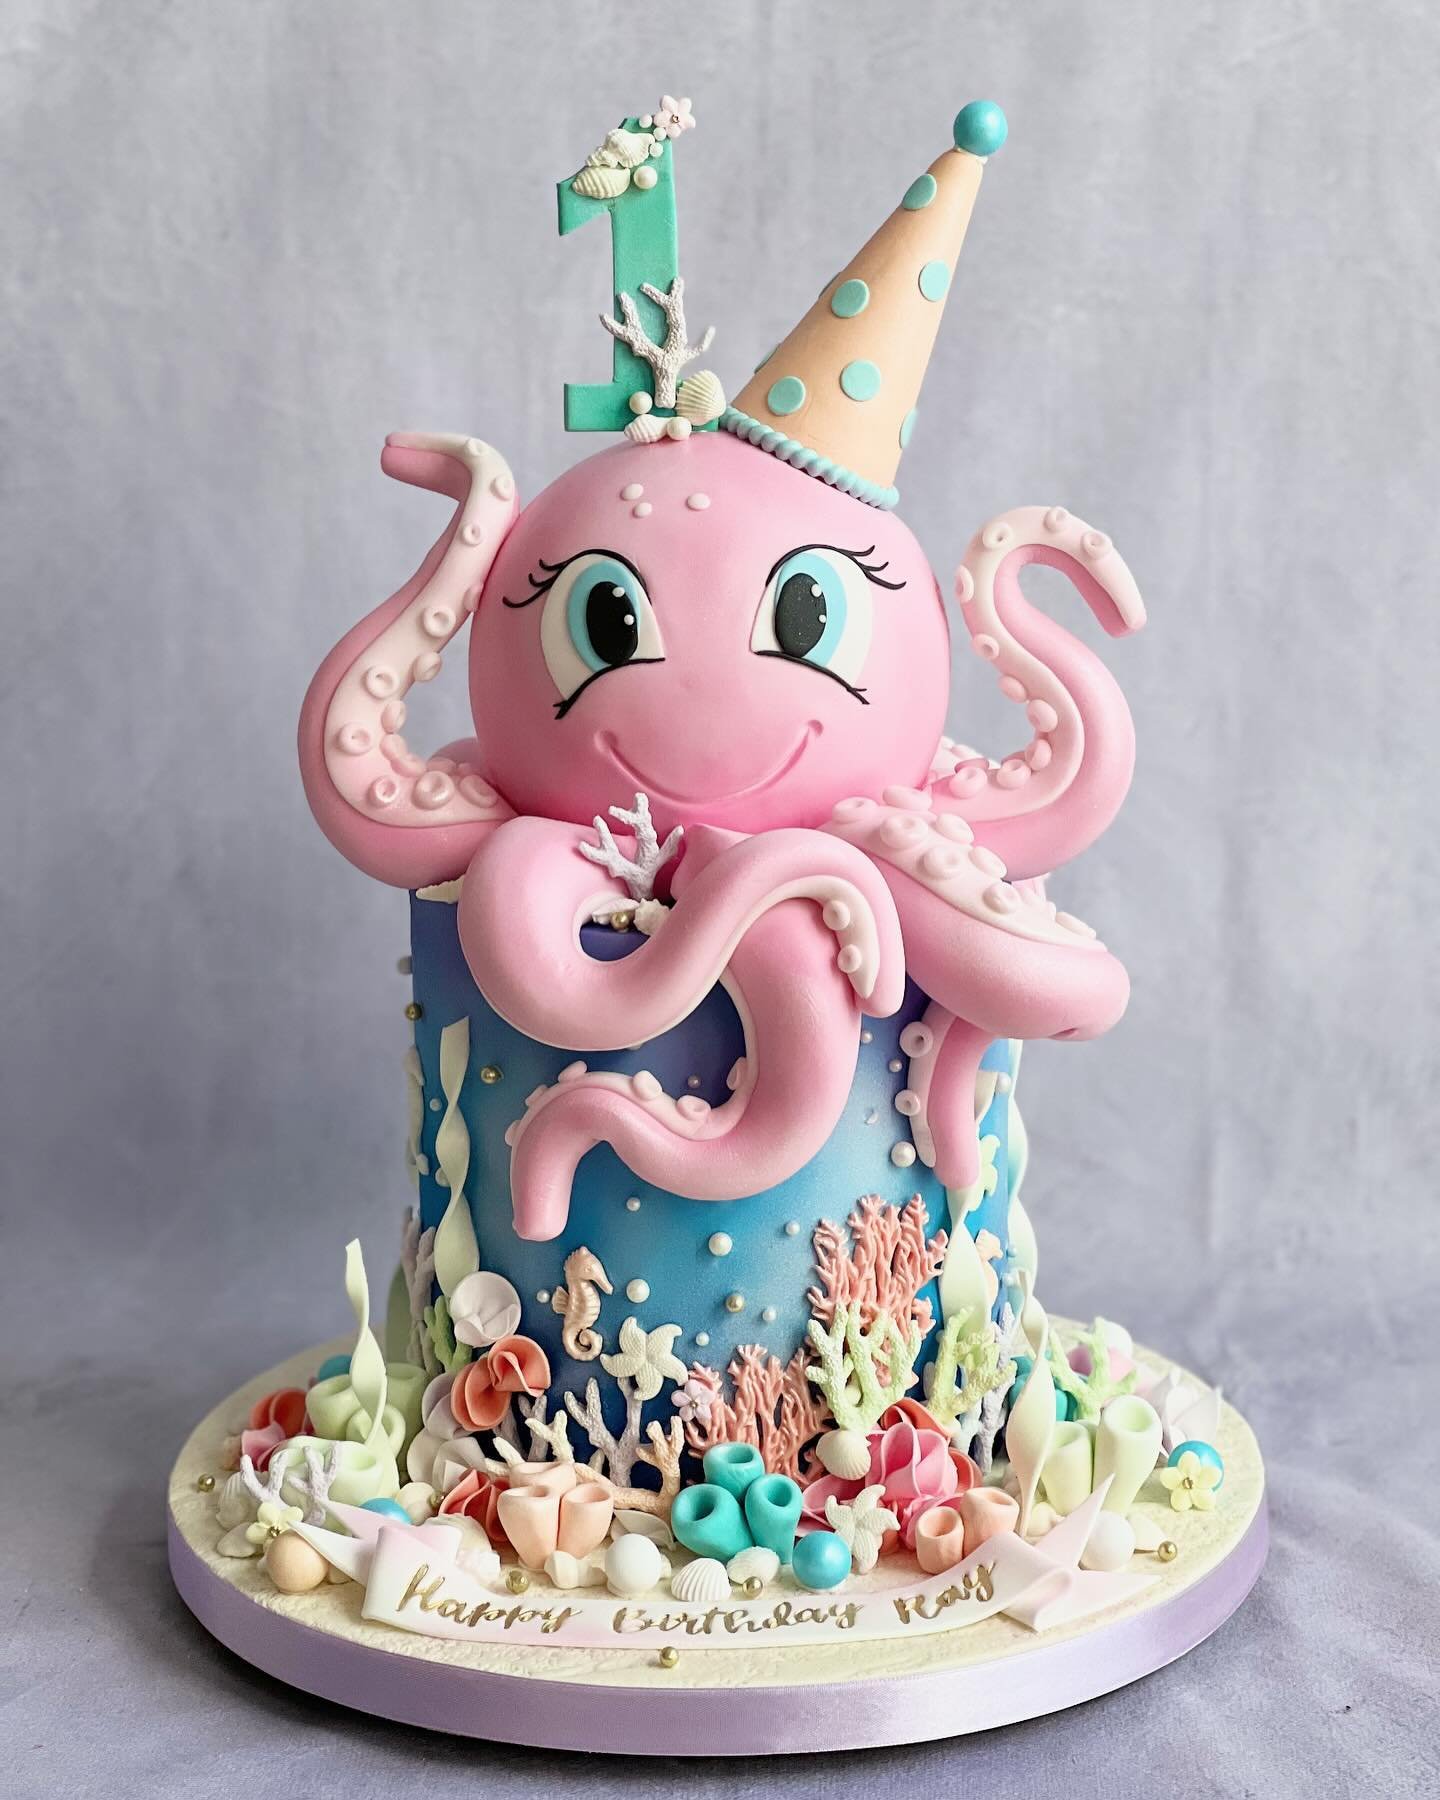 I couldn&rsquo;t resist sharing this cutie from an Under The Sea themed party we did recently. 

There was another cake and lots of different sweet treats alongside it but for me, this one was the star of the show! 

🐙🩷🪸
.

#cake #cakeart #caketab